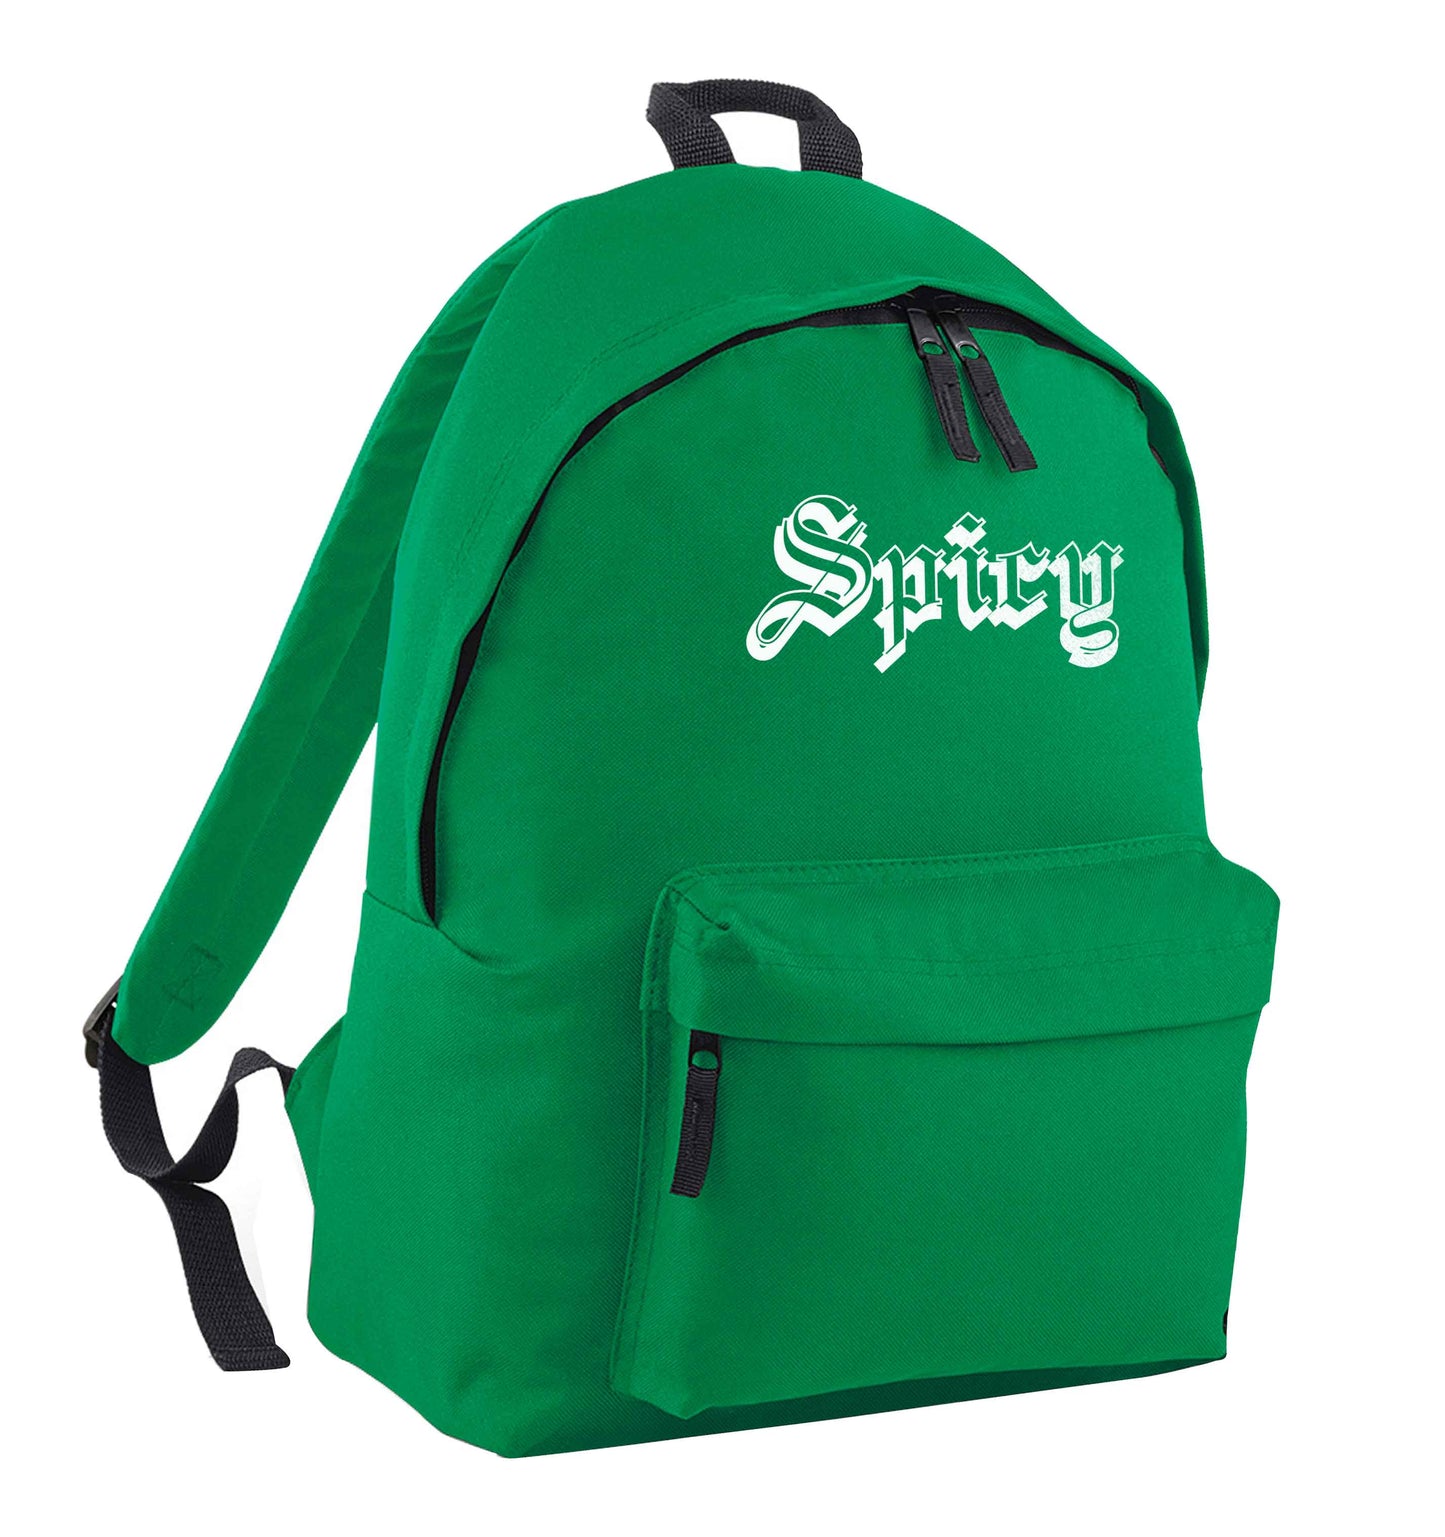 Spicy green adults backpack